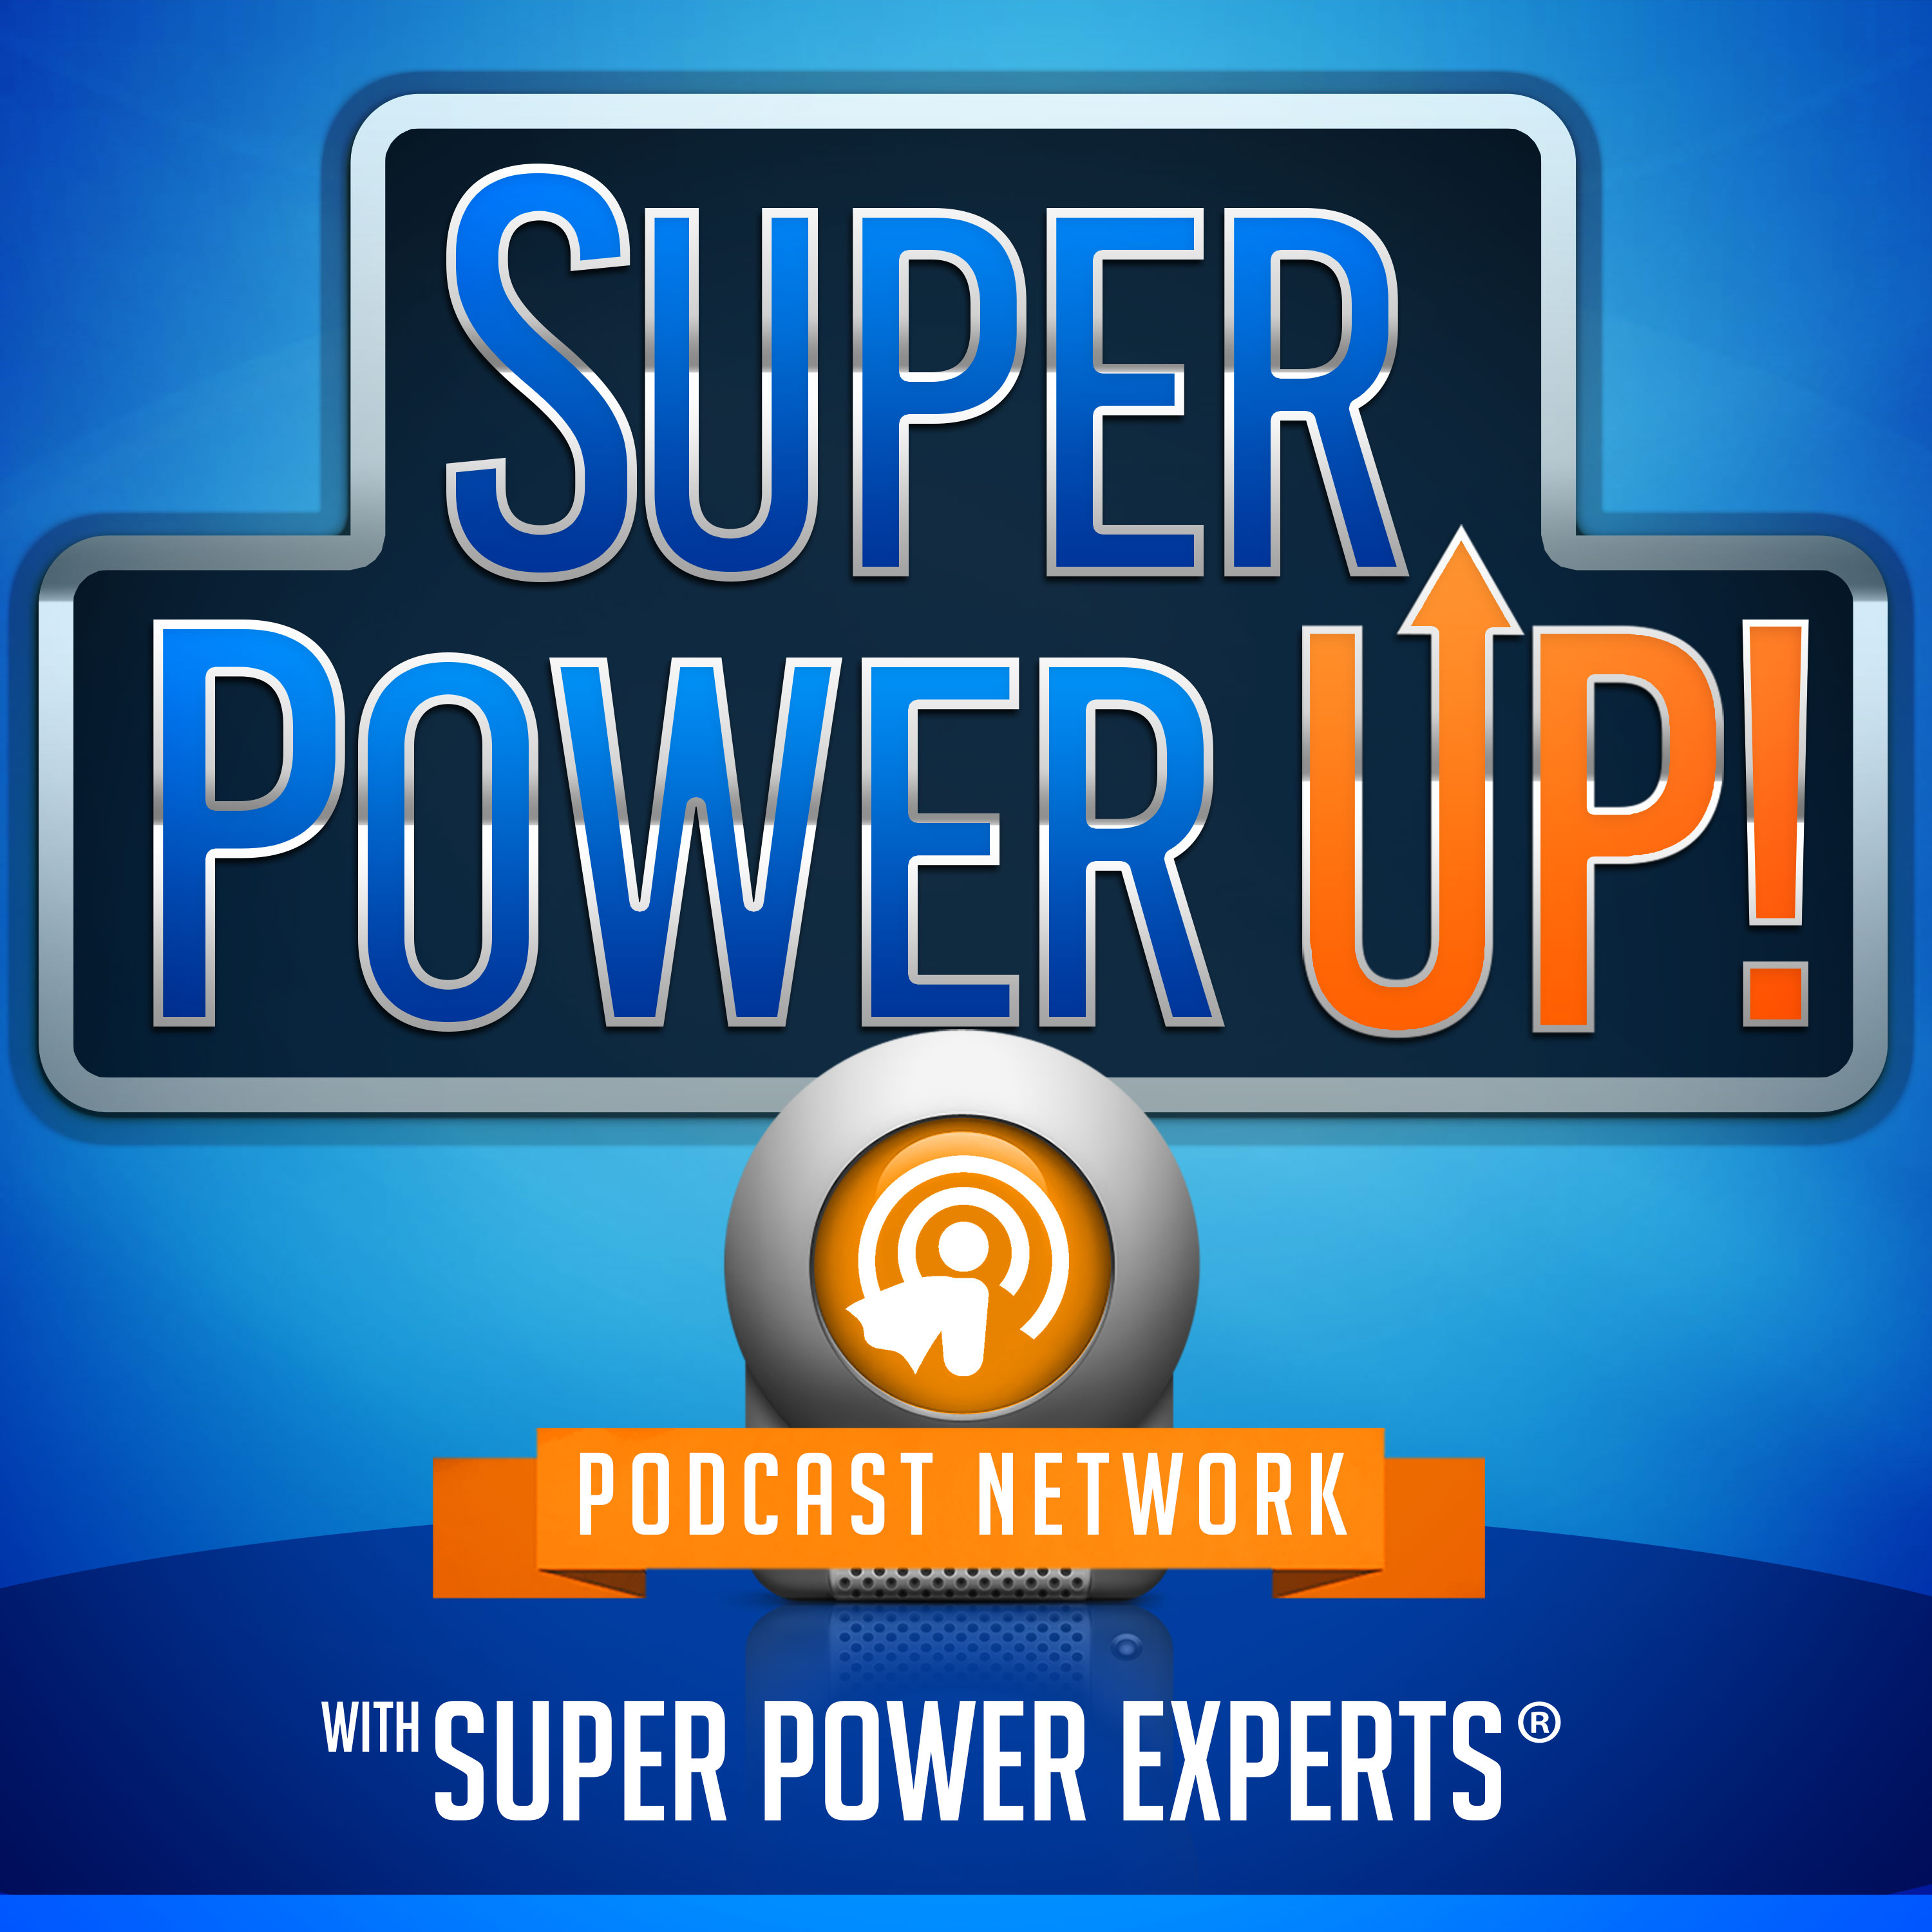 Super Power Up! Check out the Network! 